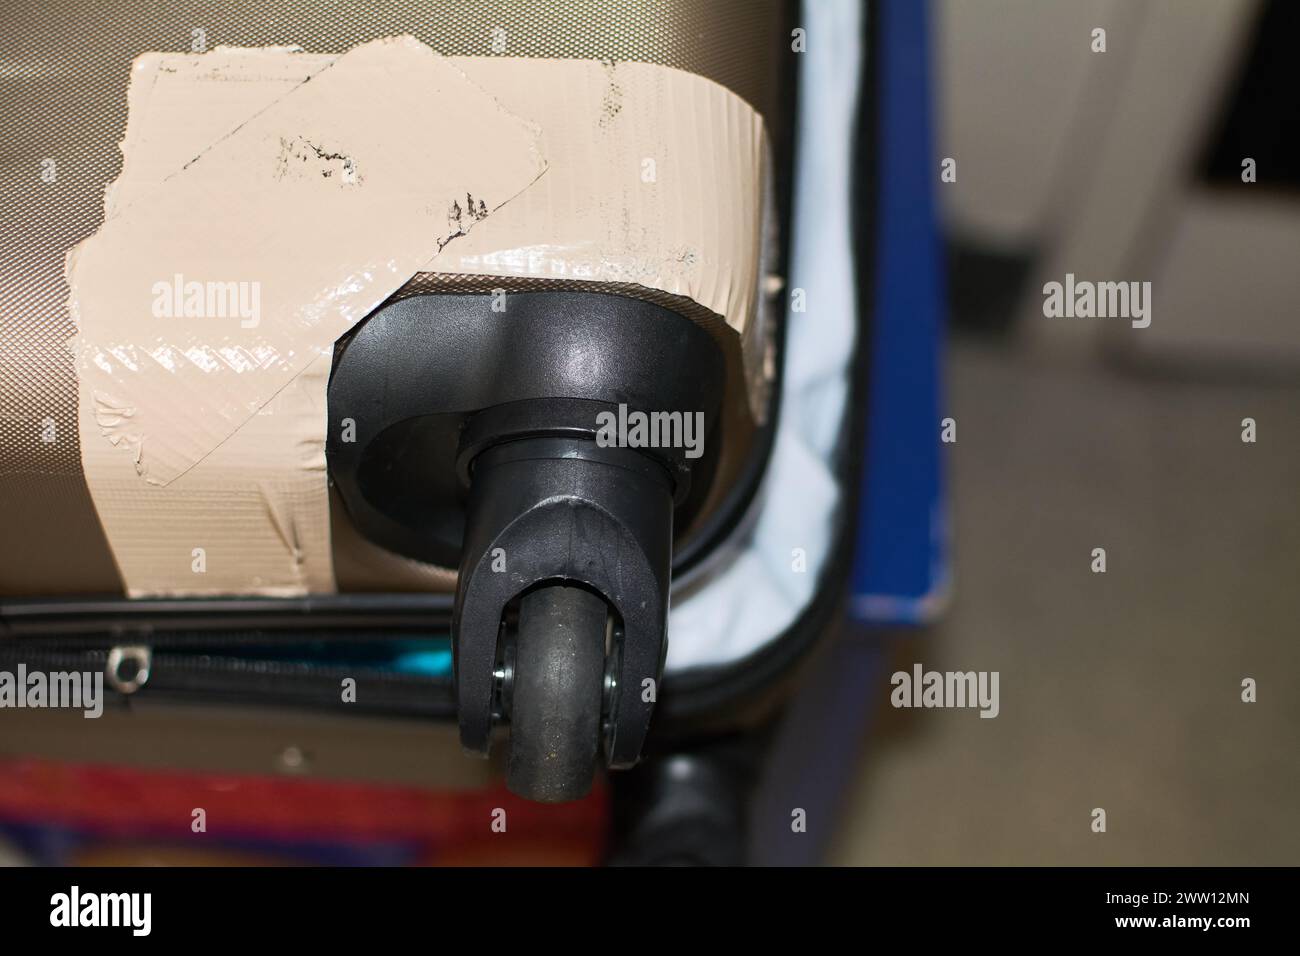 Suitcase with wheel and corner repaired with adhesive tape, showing a temporary solution. Stock Photo